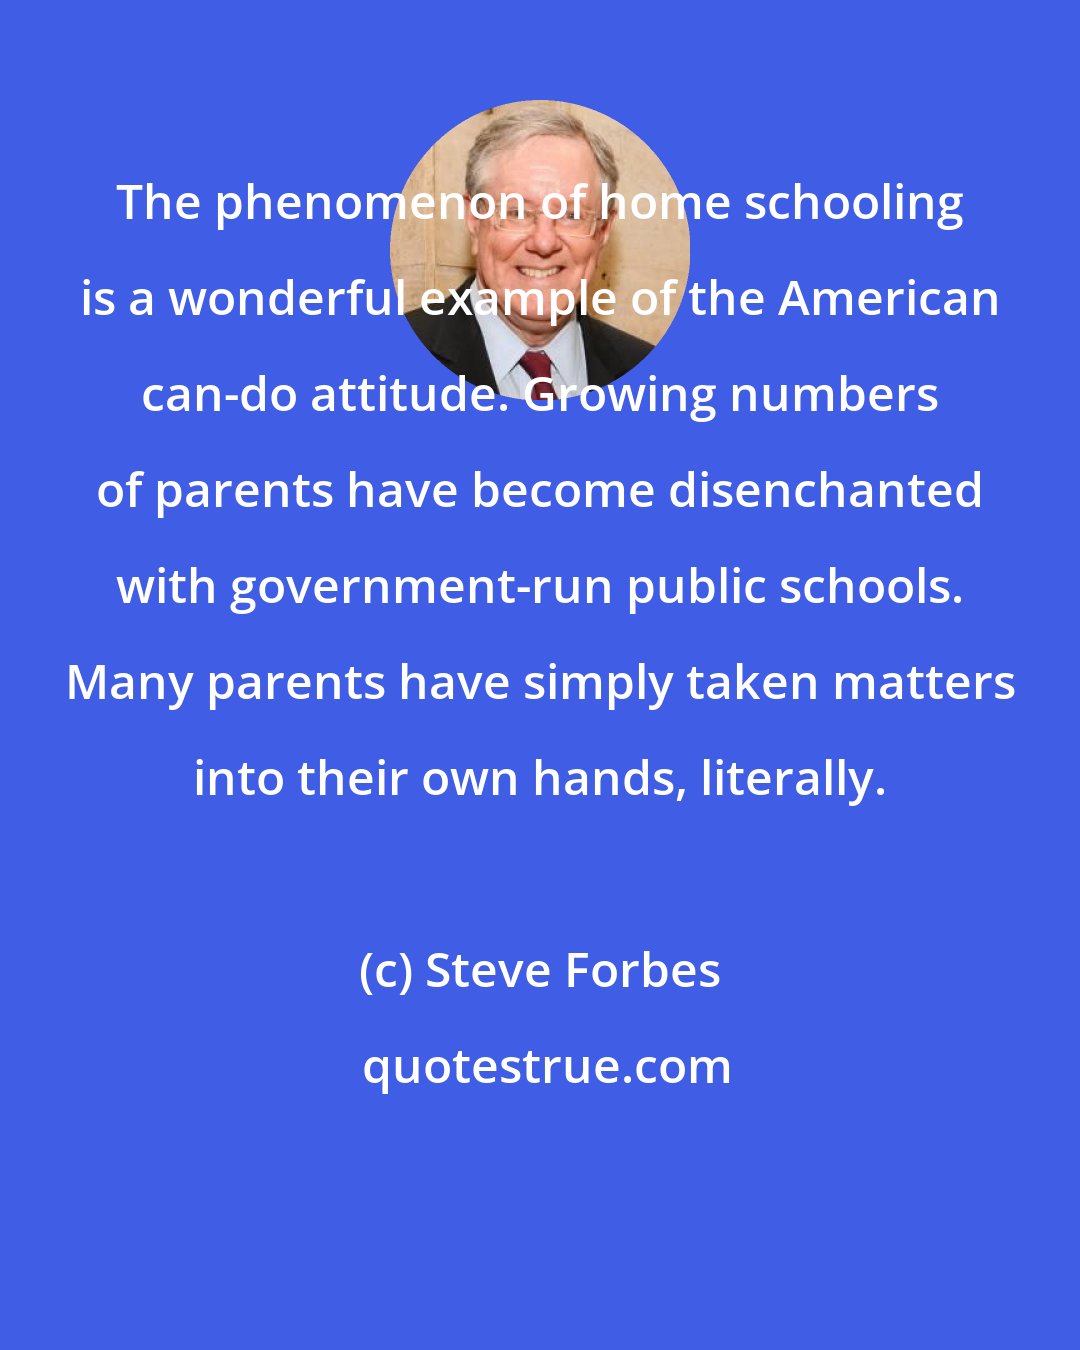 Steve Forbes: The phenomenon of home schooling is a wonderful example of the American can-do attitude. Growing numbers of parents have become disenchanted with government-run public schools. Many parents have simply taken matters into their own hands, literally.